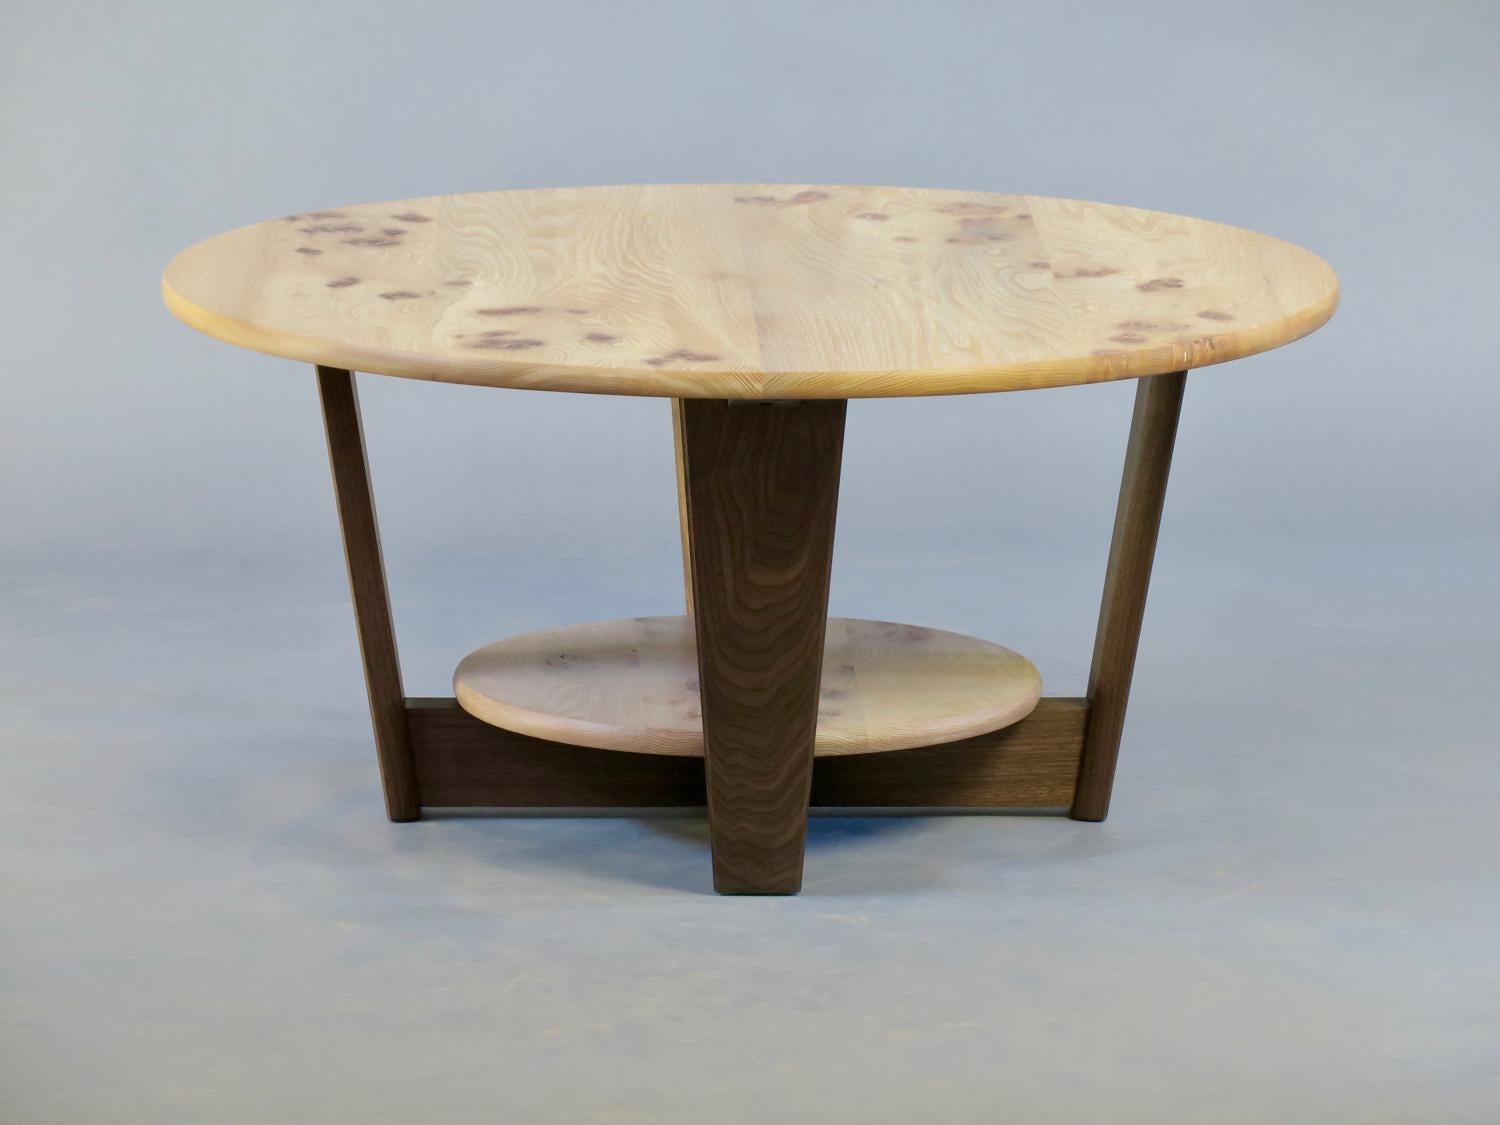 The Wilton coffee table in walnut and a contrasting figured and cerused 